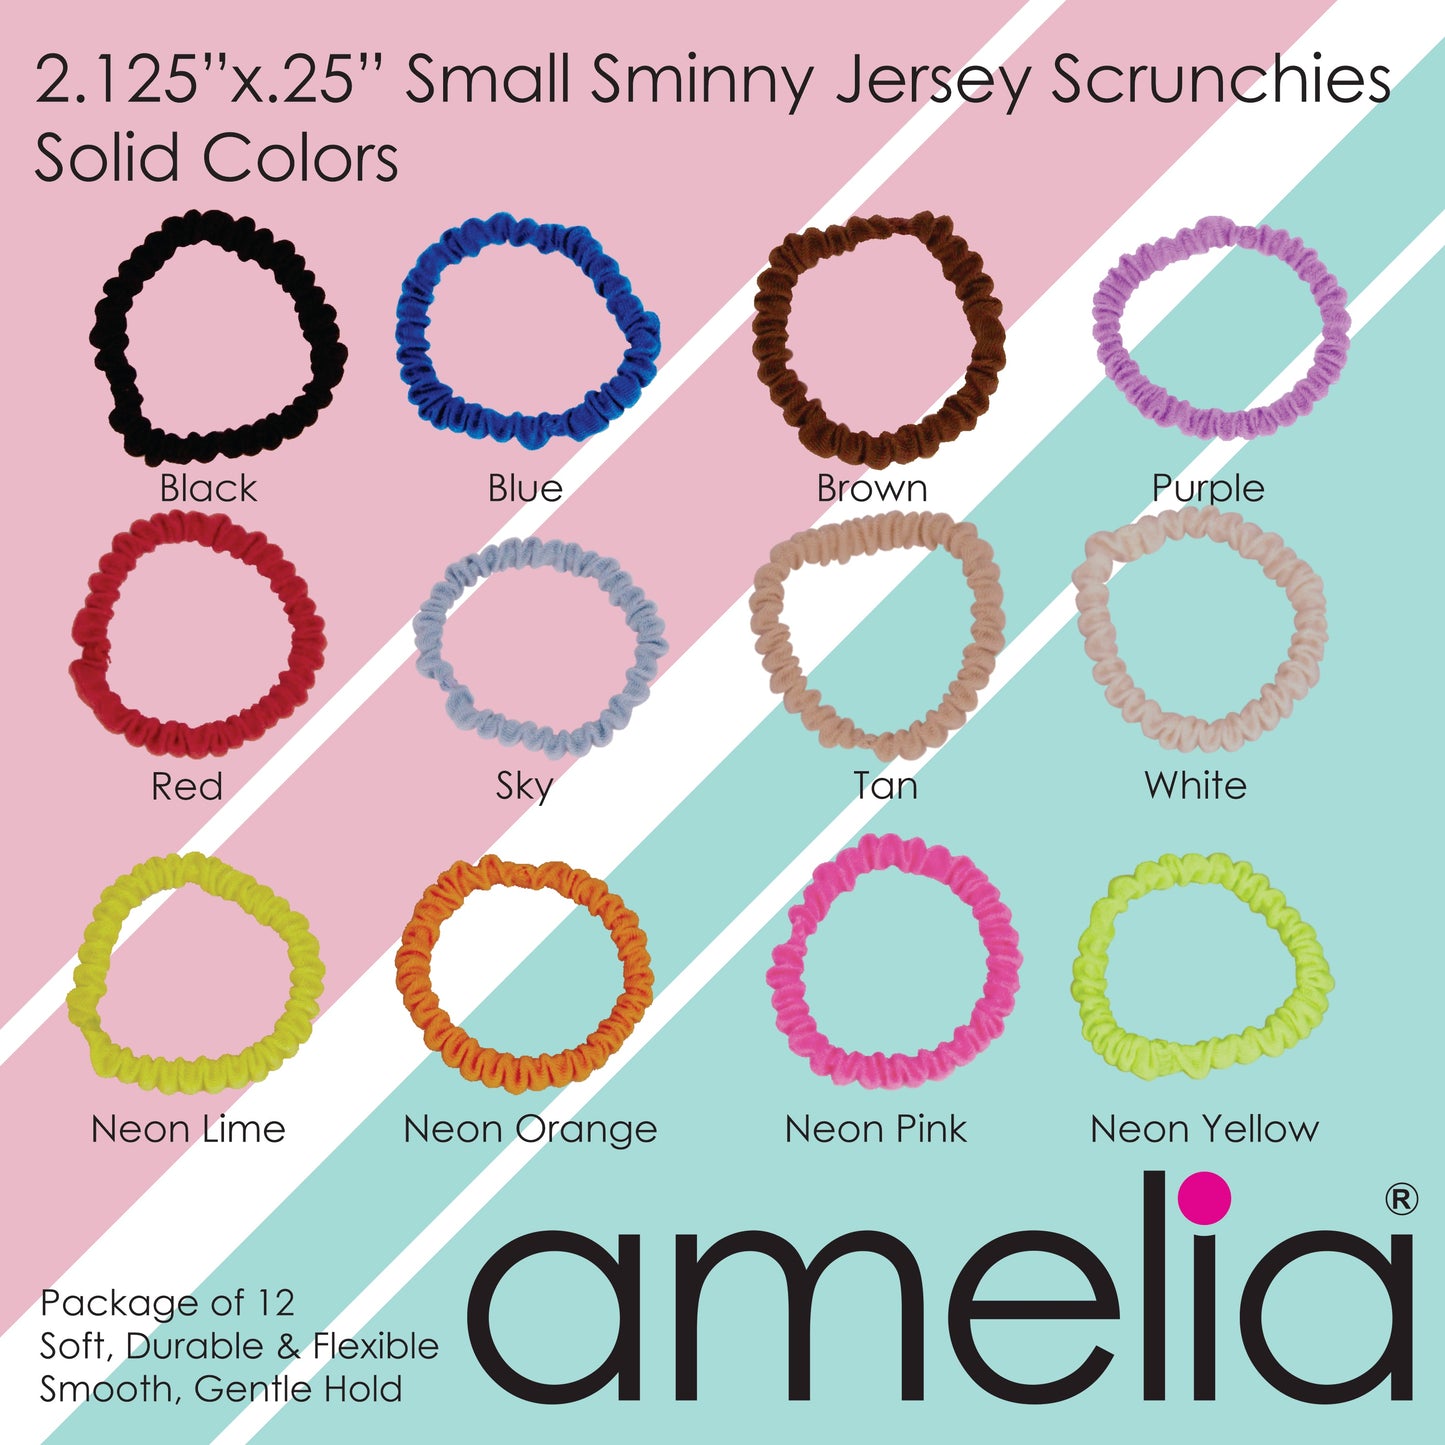 Amelia Beauty, Pink and White Dot Mix Skinny Jersey Scrunchies, 2.125in Diameter, Gentle on Hair, Strong Hold, No Snag, No Dents or Creases. 12 Pack